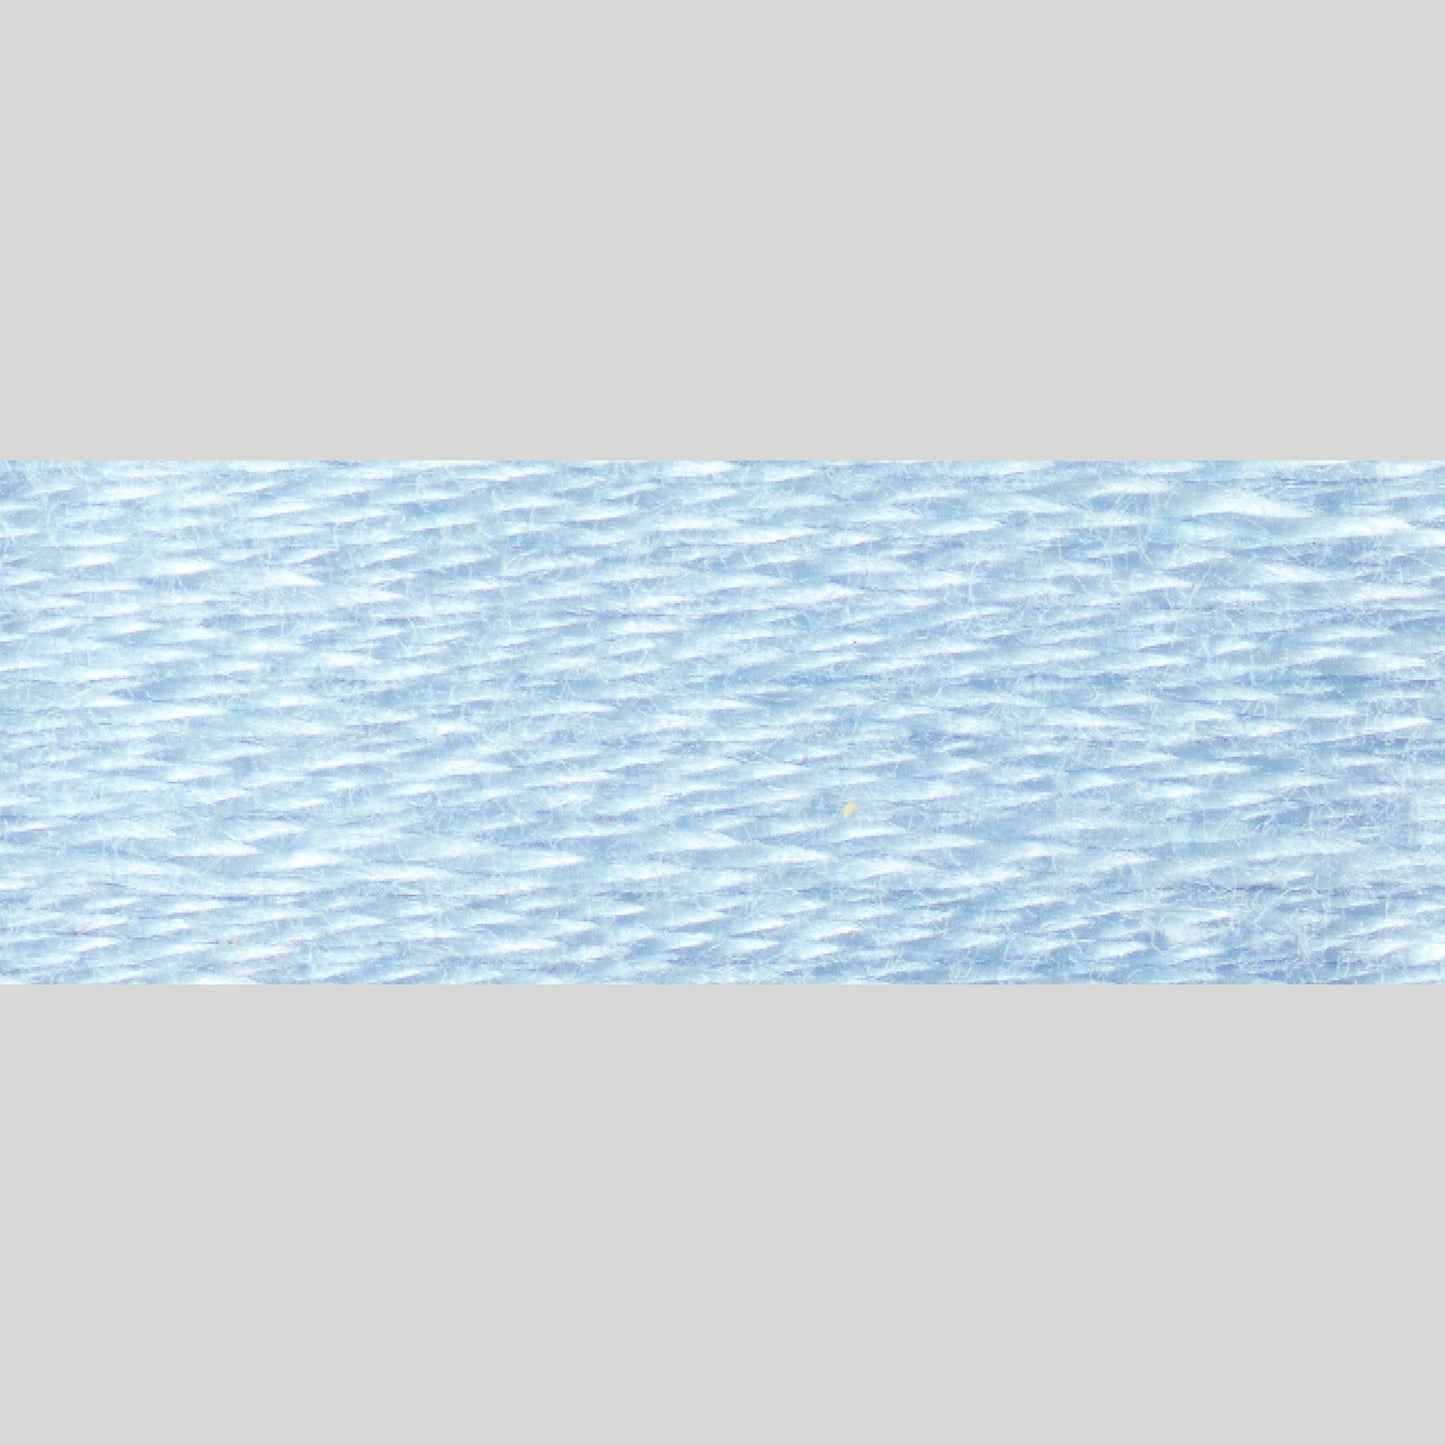 DMC Embroidery Floss - 3841 Pale Baby Blue Alternative View #1